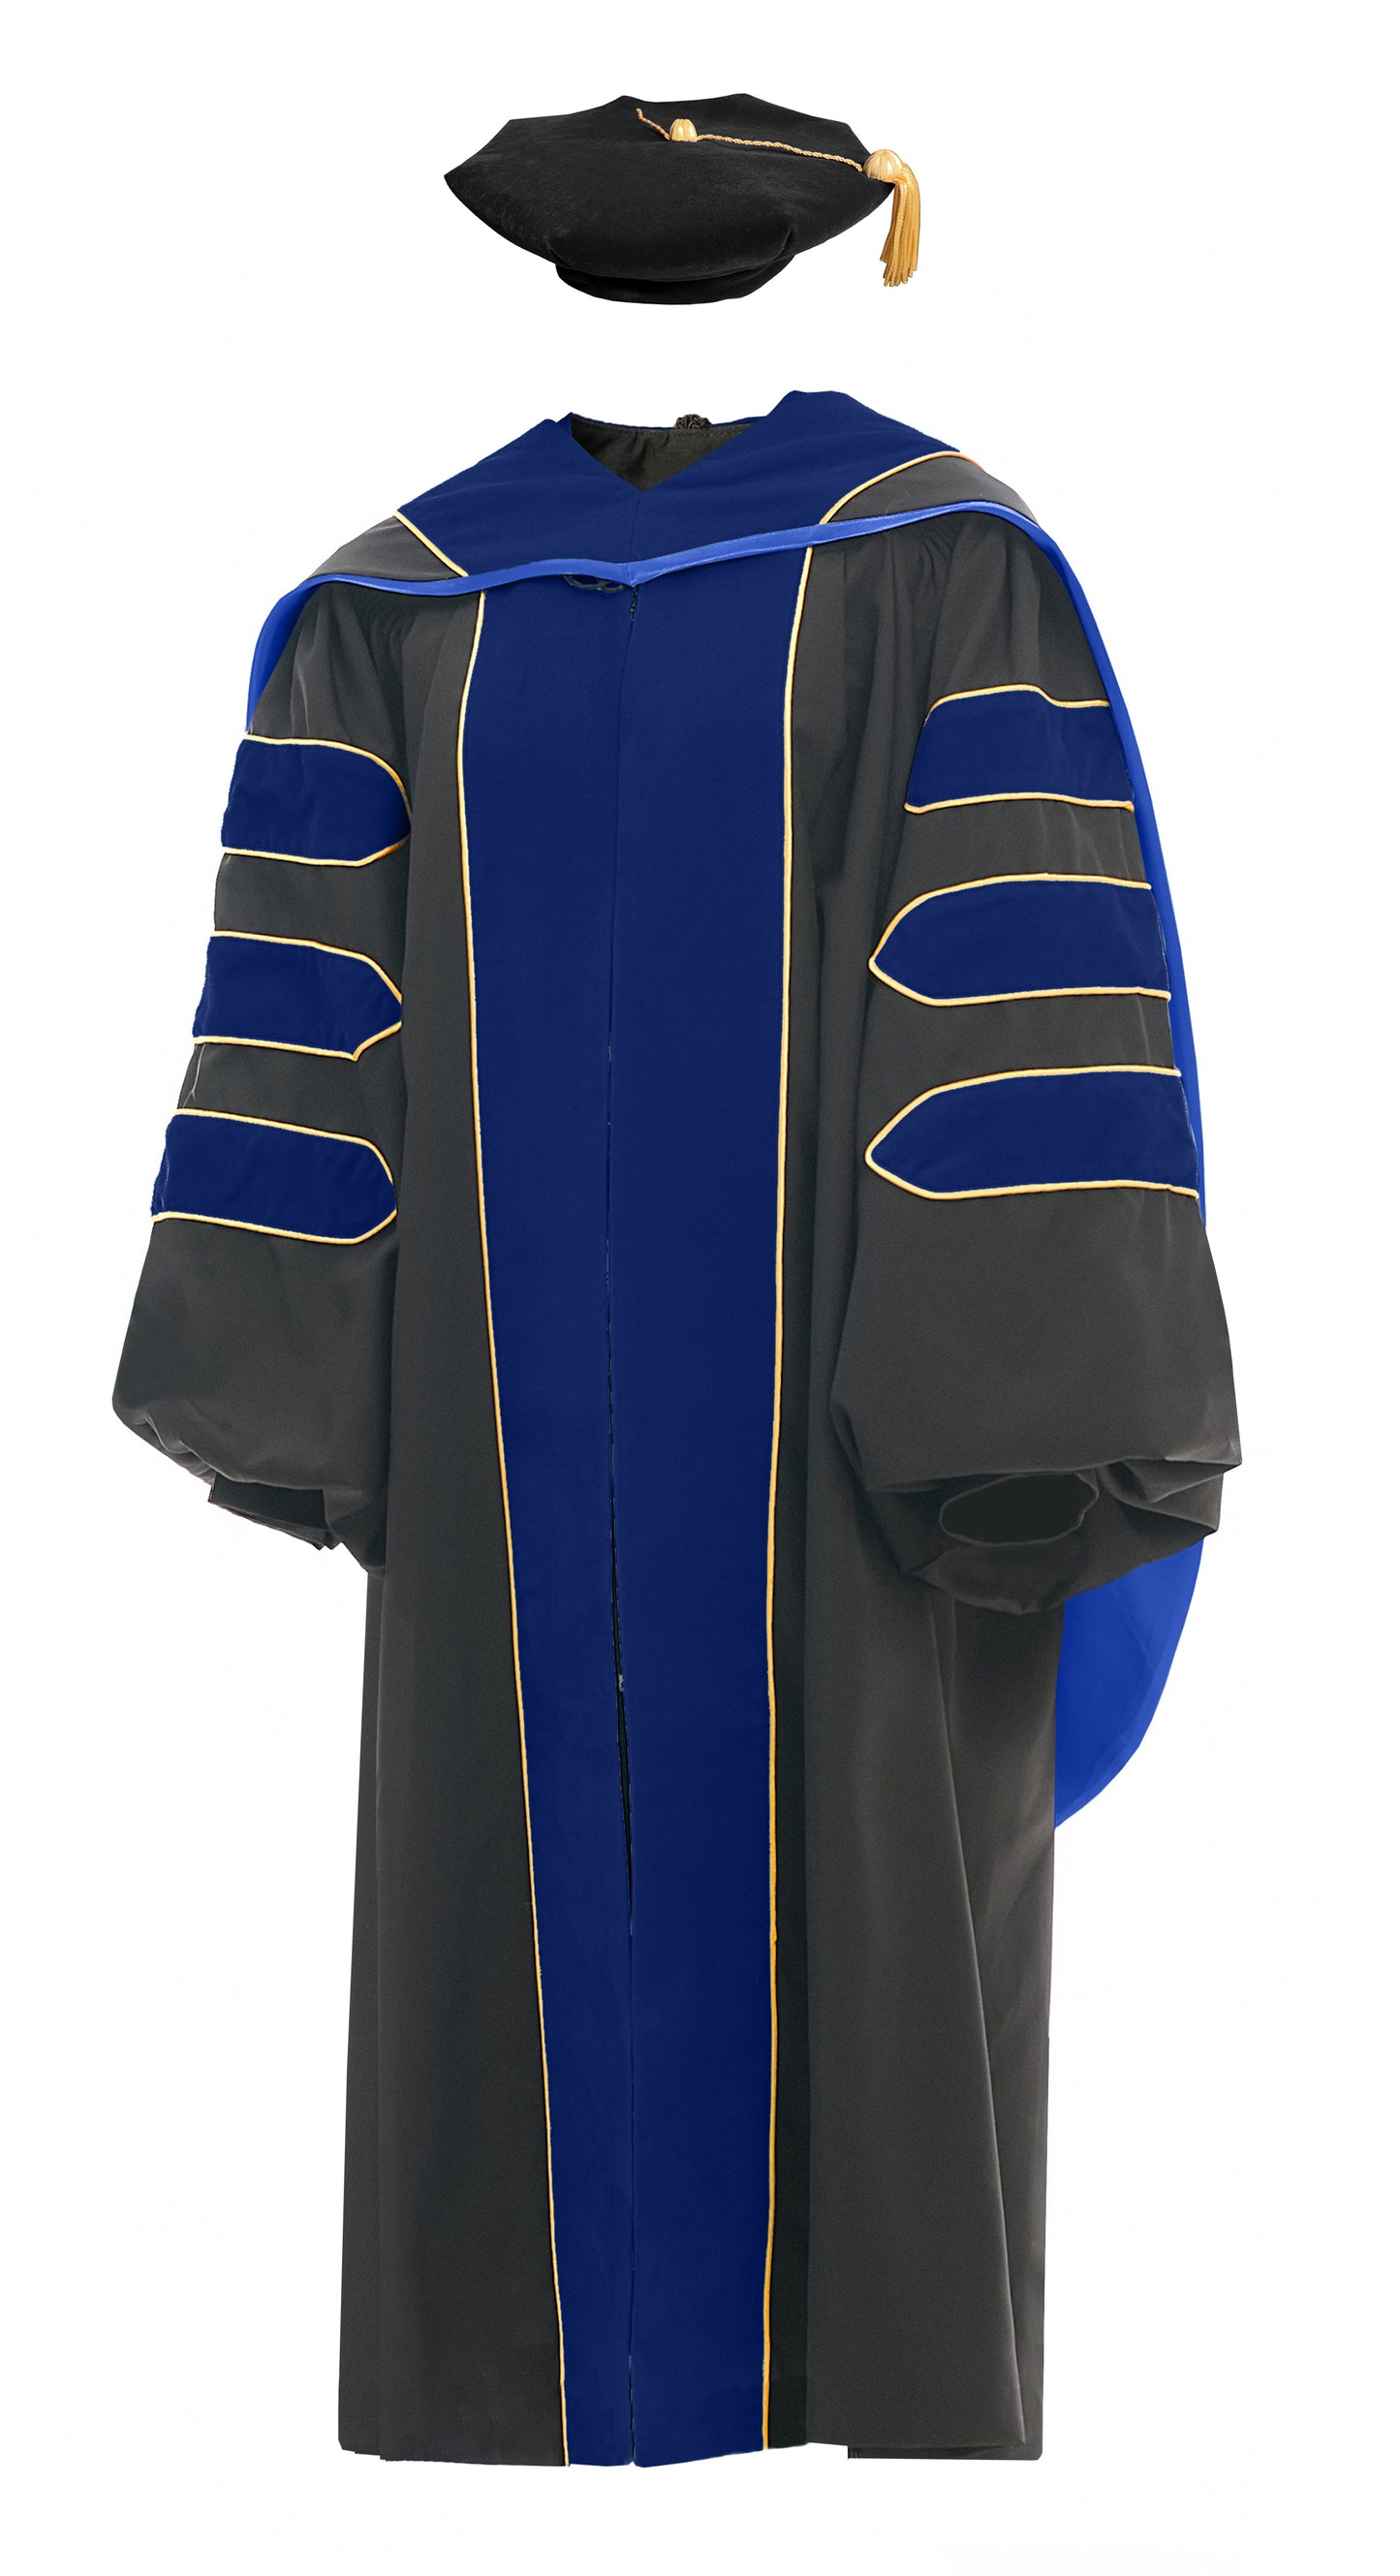 Deluxe Graduation Doctoral Tam and Hood, Graduation Gown